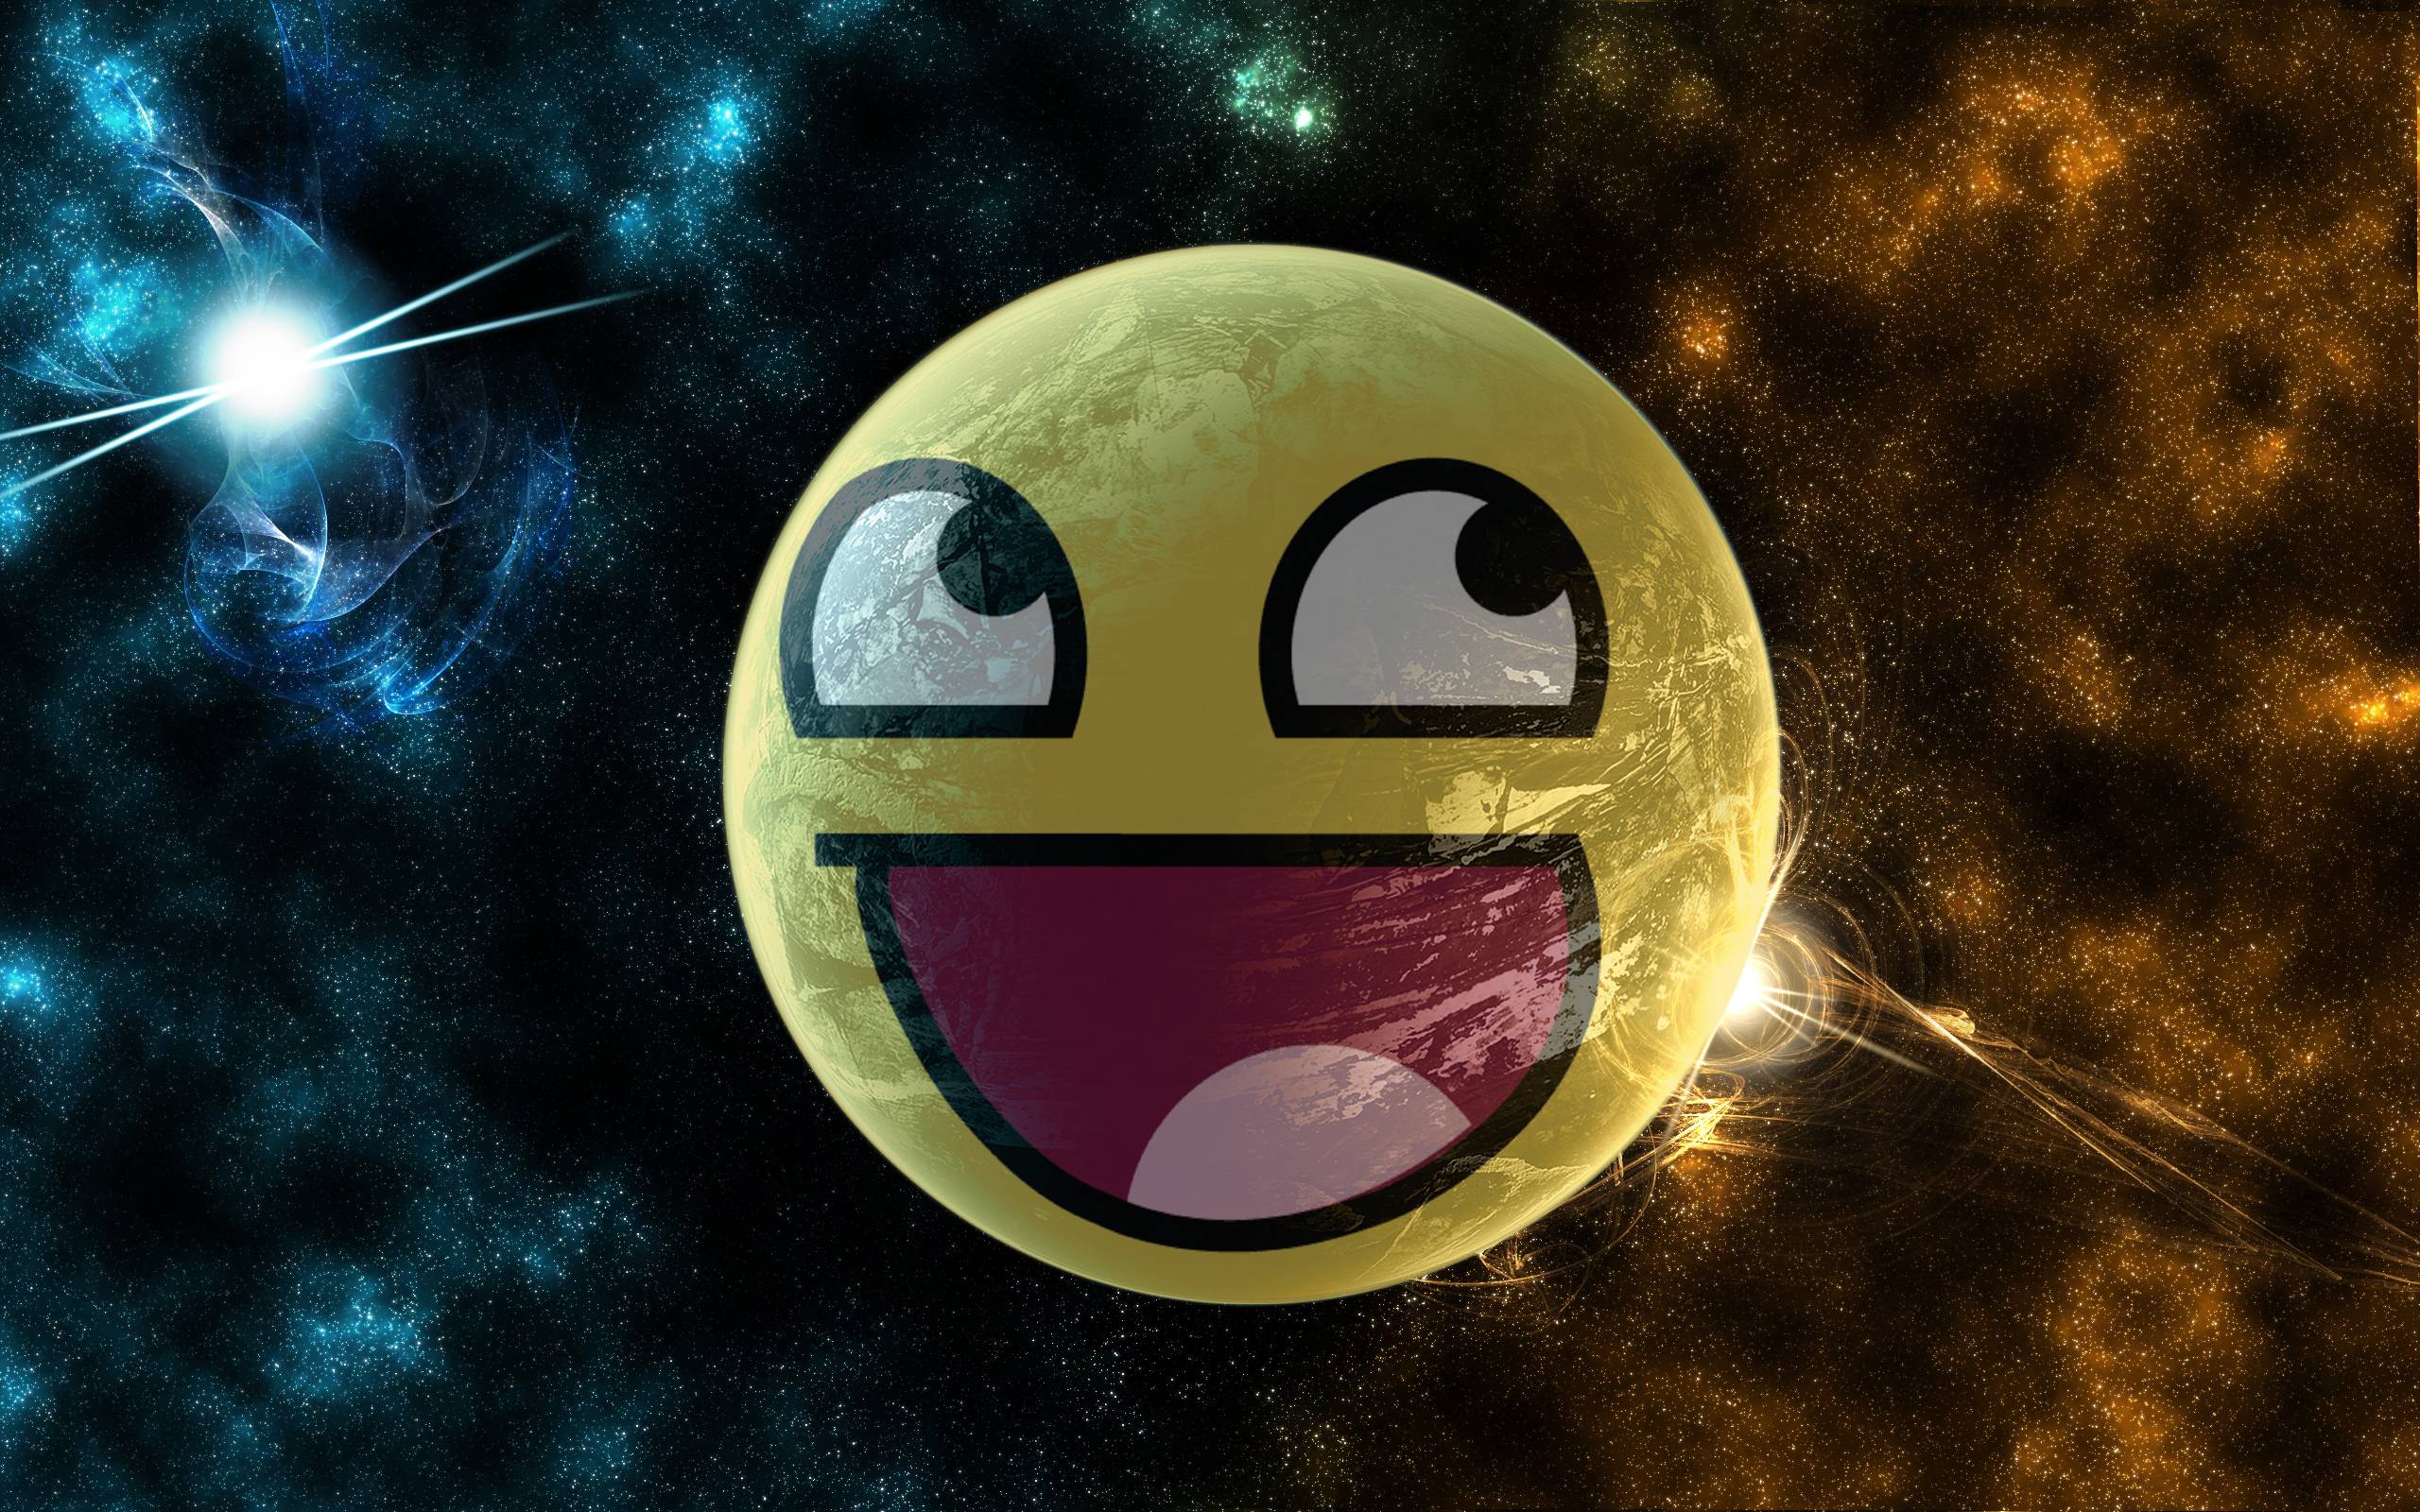 Awesome Smiley Wallpaper